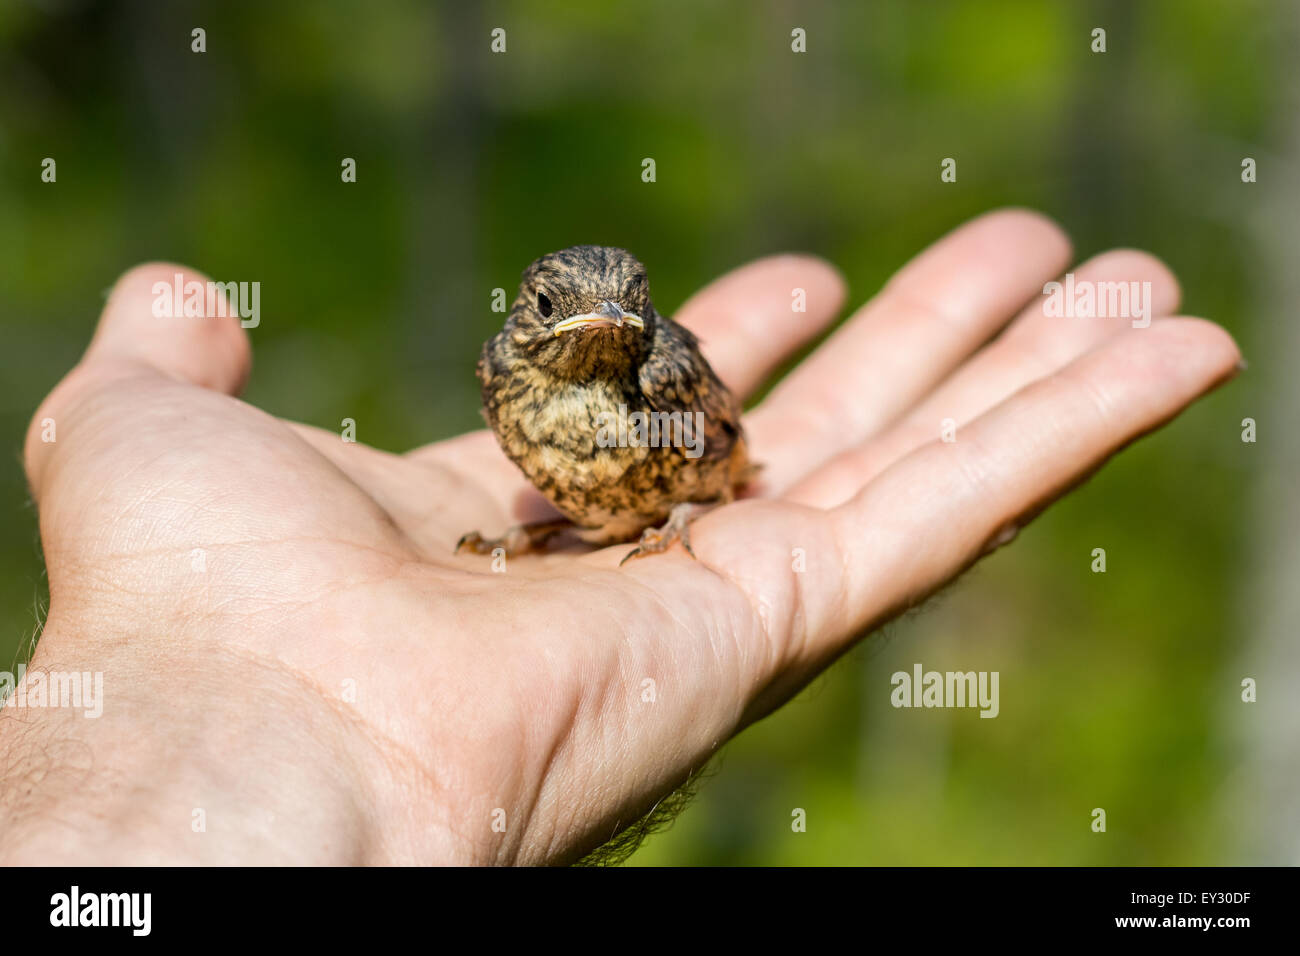 A small bird chick sitting on a palm Stock Photo